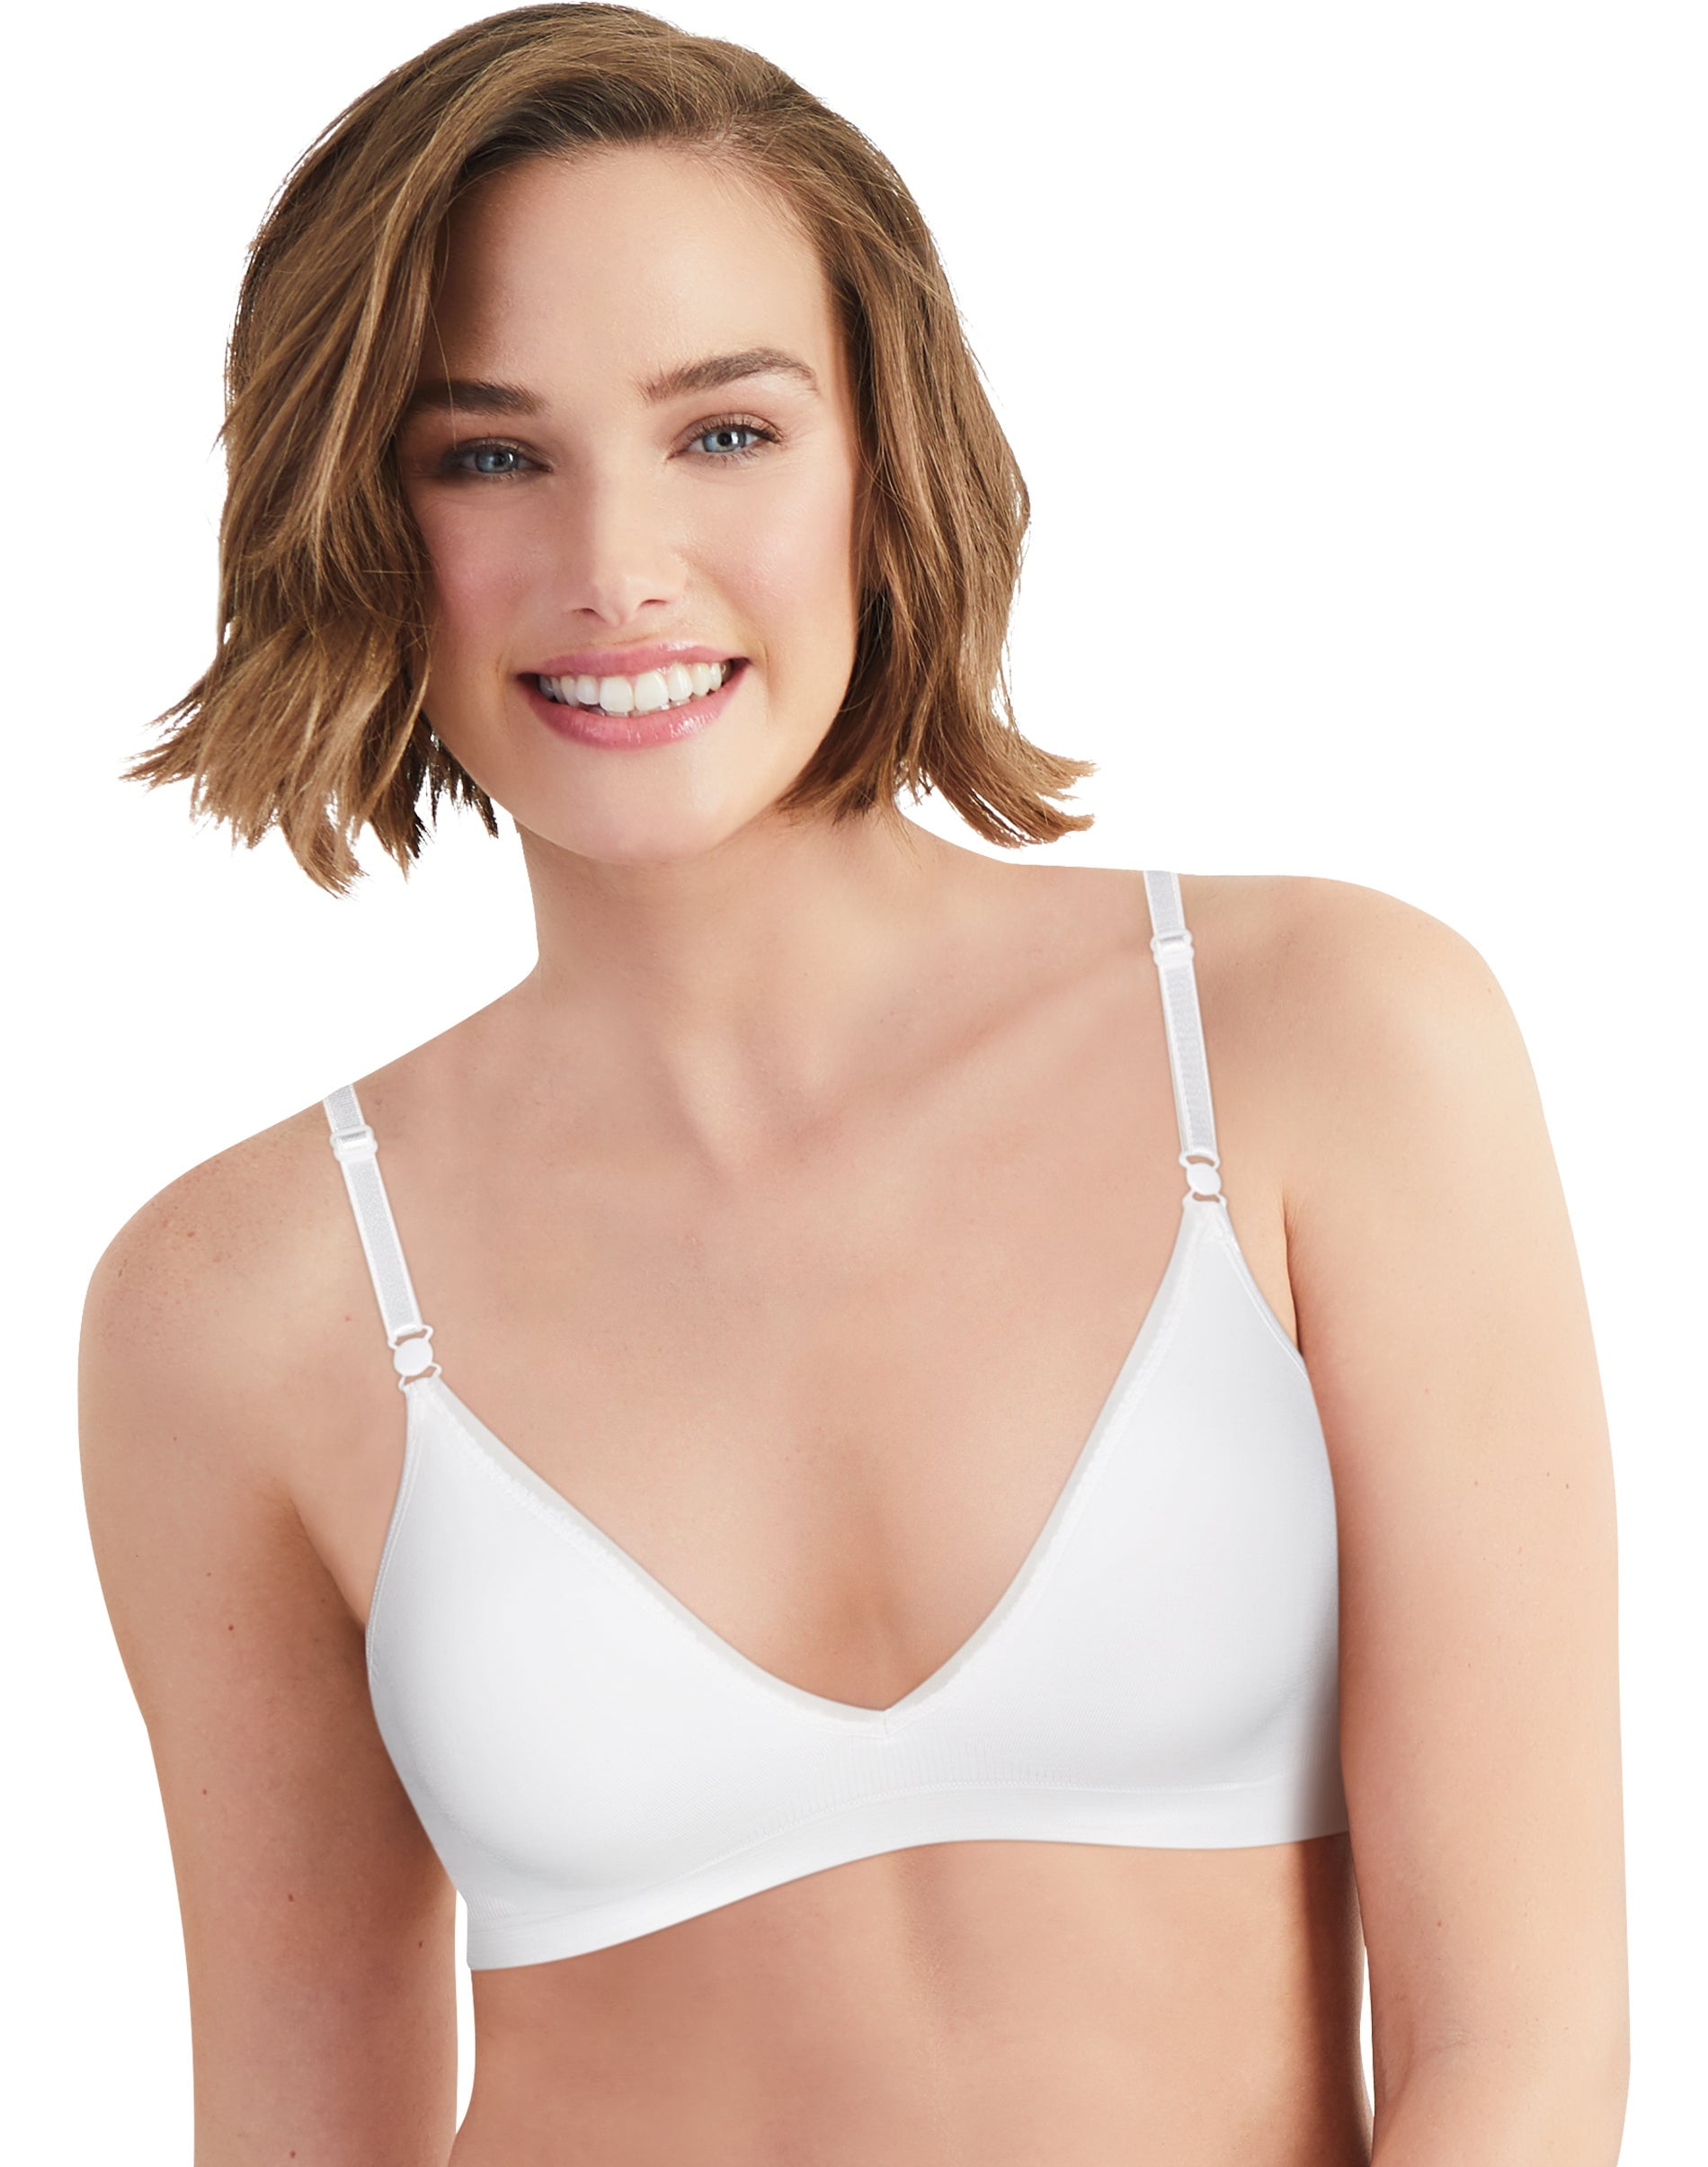 Vintage New Hanes Perfect Coverage Wireless Seamless Convertible T-shirt Bra  With Comfortflex Fit Snow White Size Large 36D, 38B,C,D, 40B -  Hong  Kong